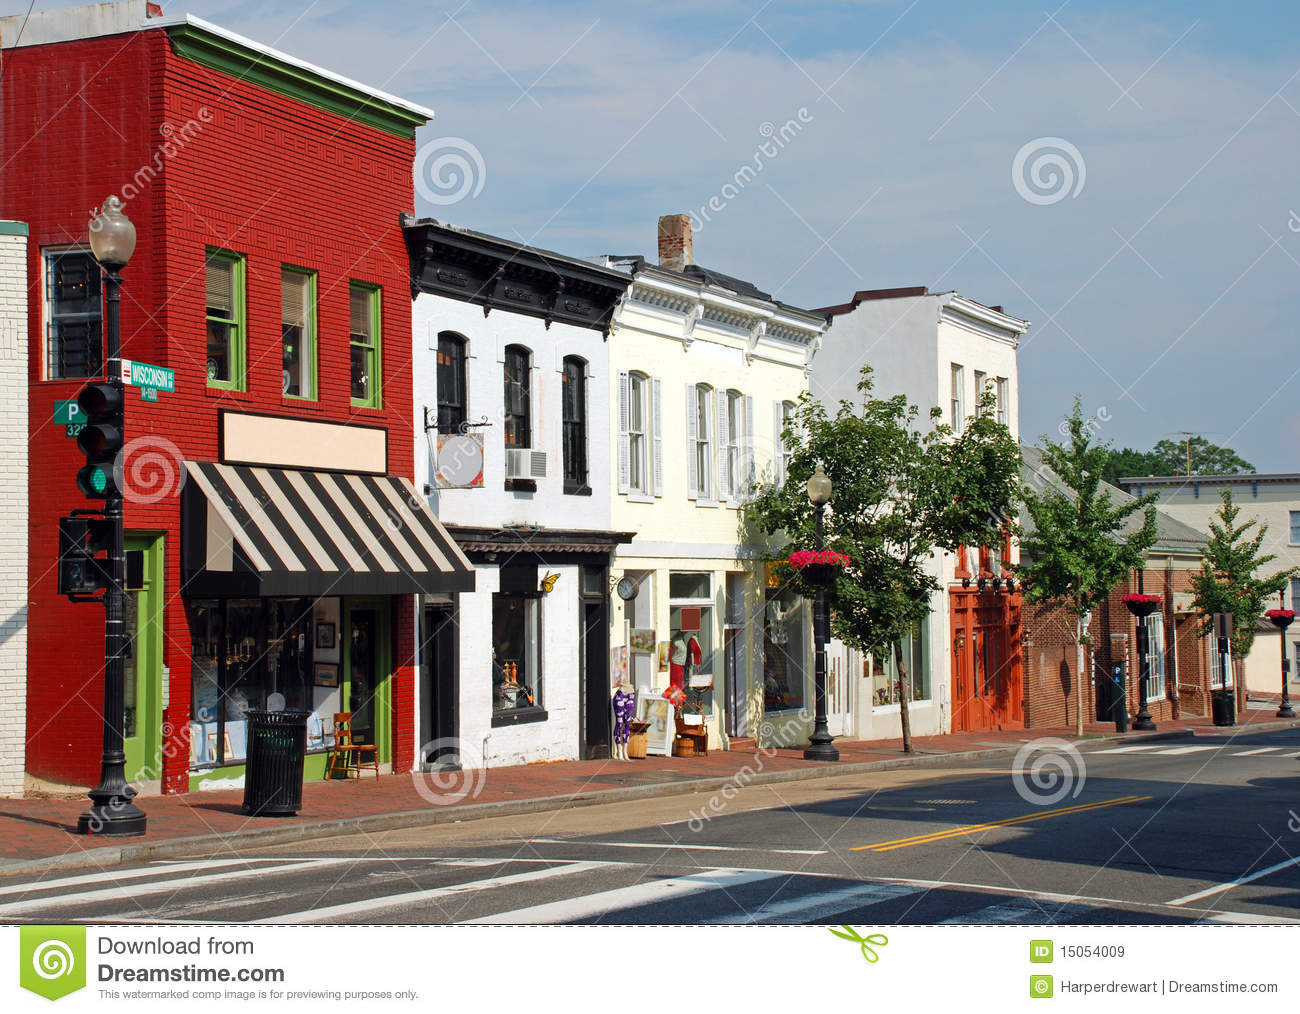 Small Town Main Street 2 Royalty Free Stock Images   Image  15054009